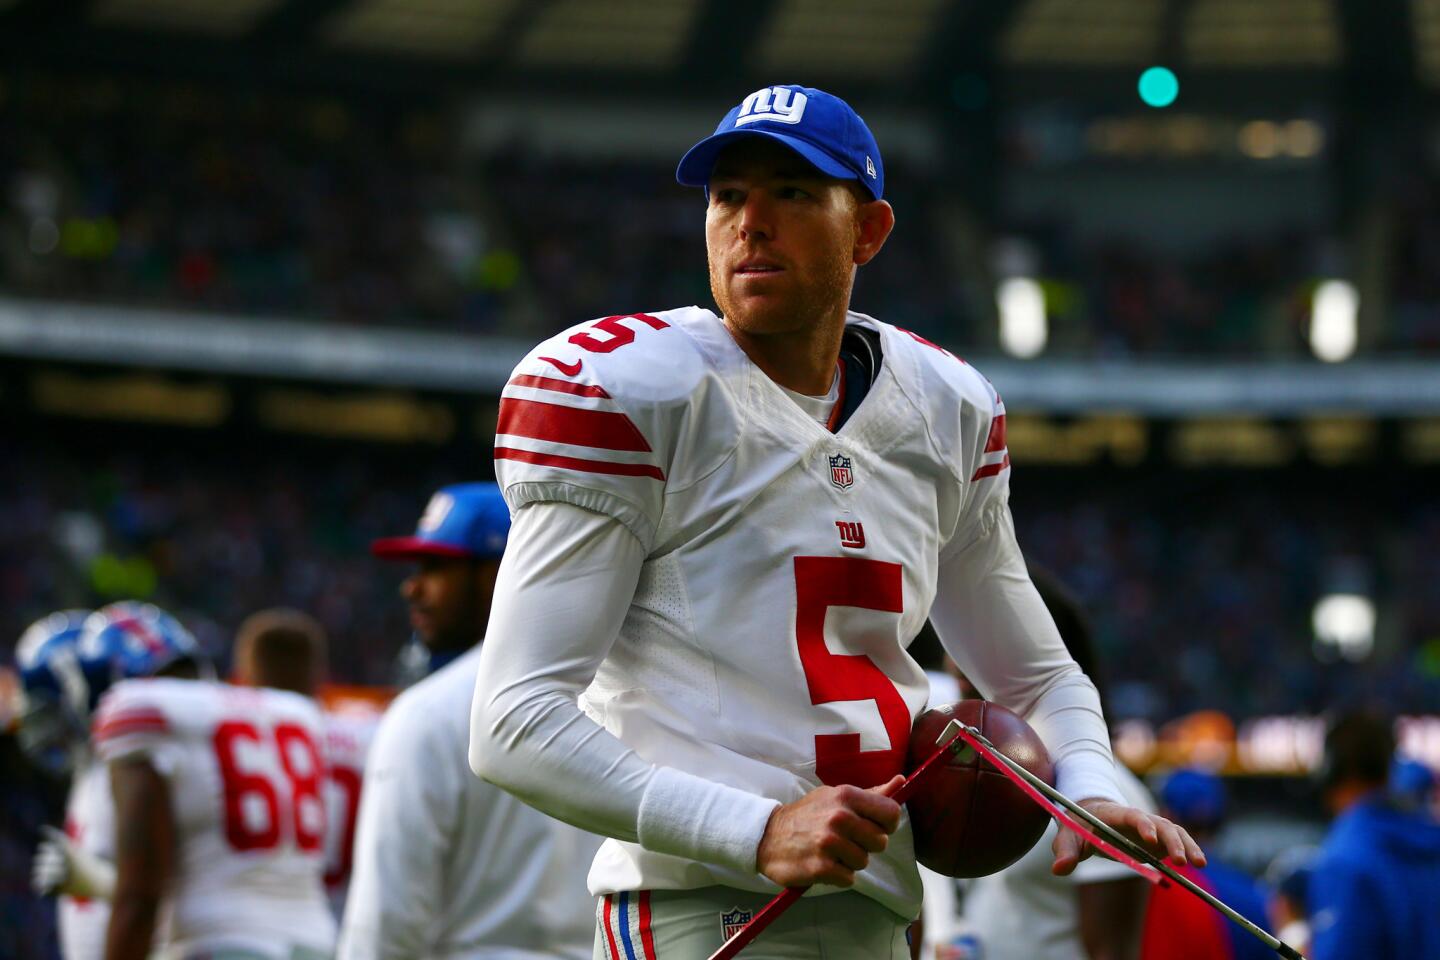 Robbie Gould looks on during a game against the Rams at Twickenham Stadium on Oct. 23, 2016, in London, England.